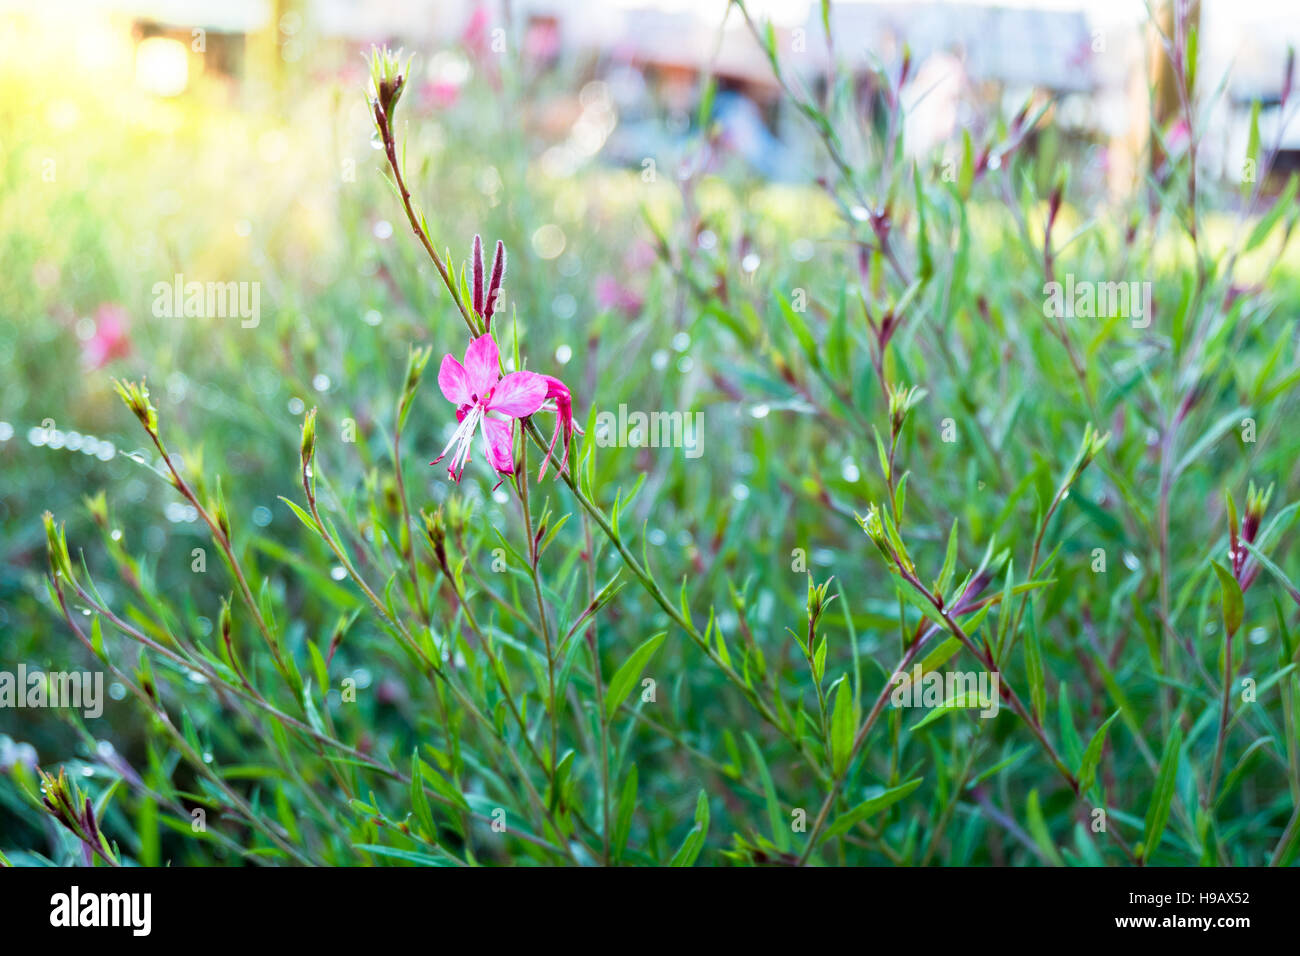 Pink flower with green grass in a park Stock Photo